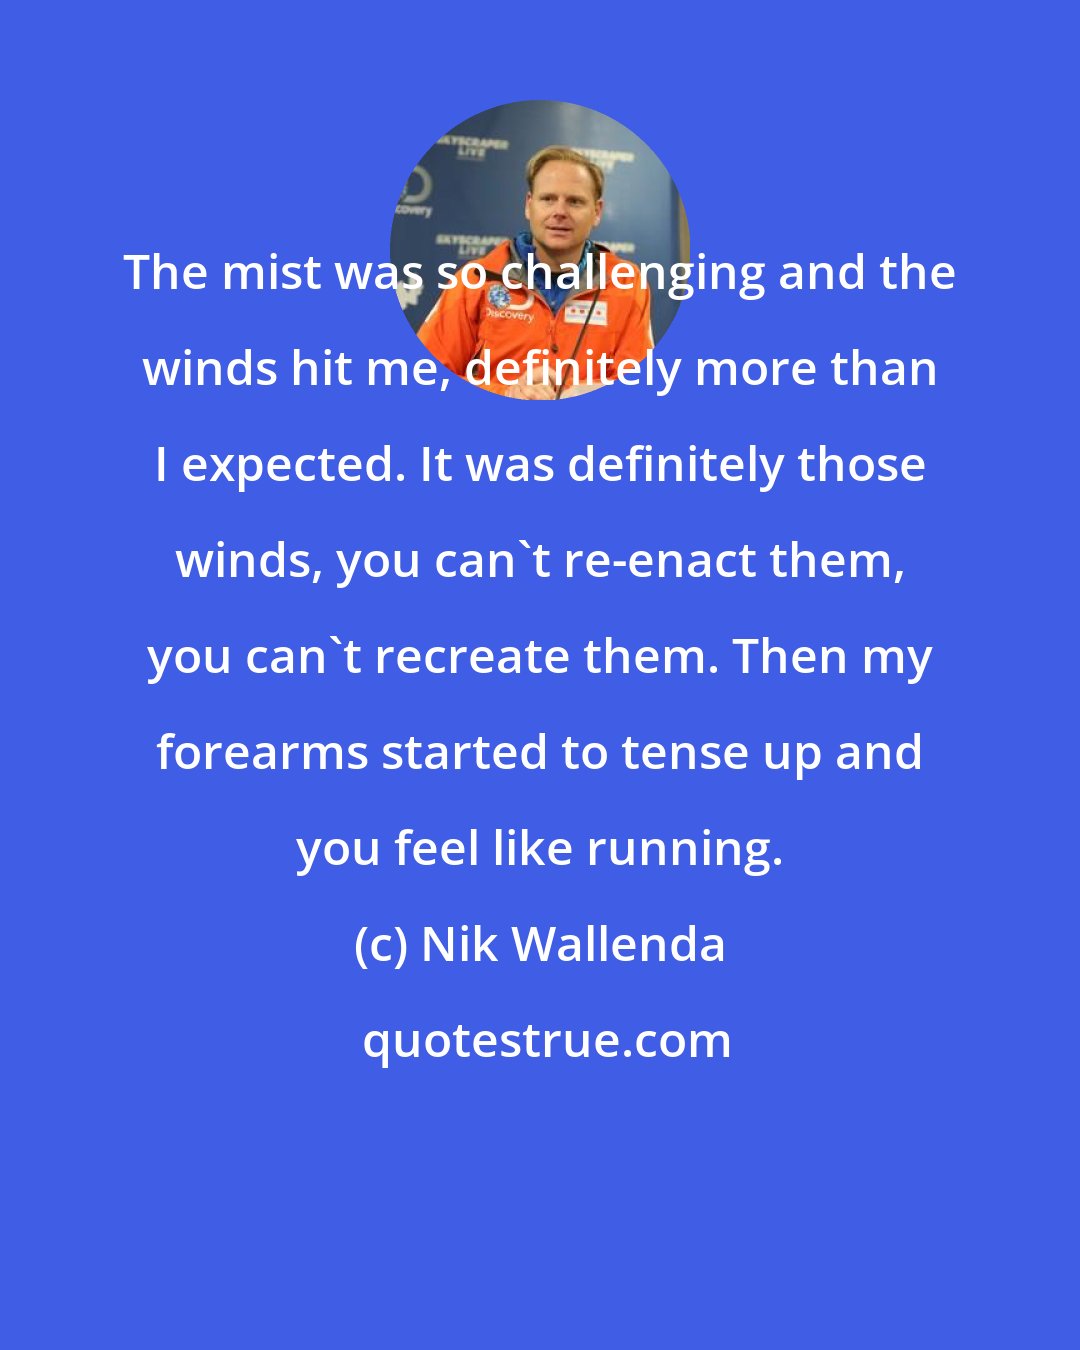 Nik Wallenda: The mist was so challenging and the winds hit me, definitely more than I expected. It was definitely those winds, you can't re-enact them, you can't recreate them. Then my forearms started to tense up and you feel like running.